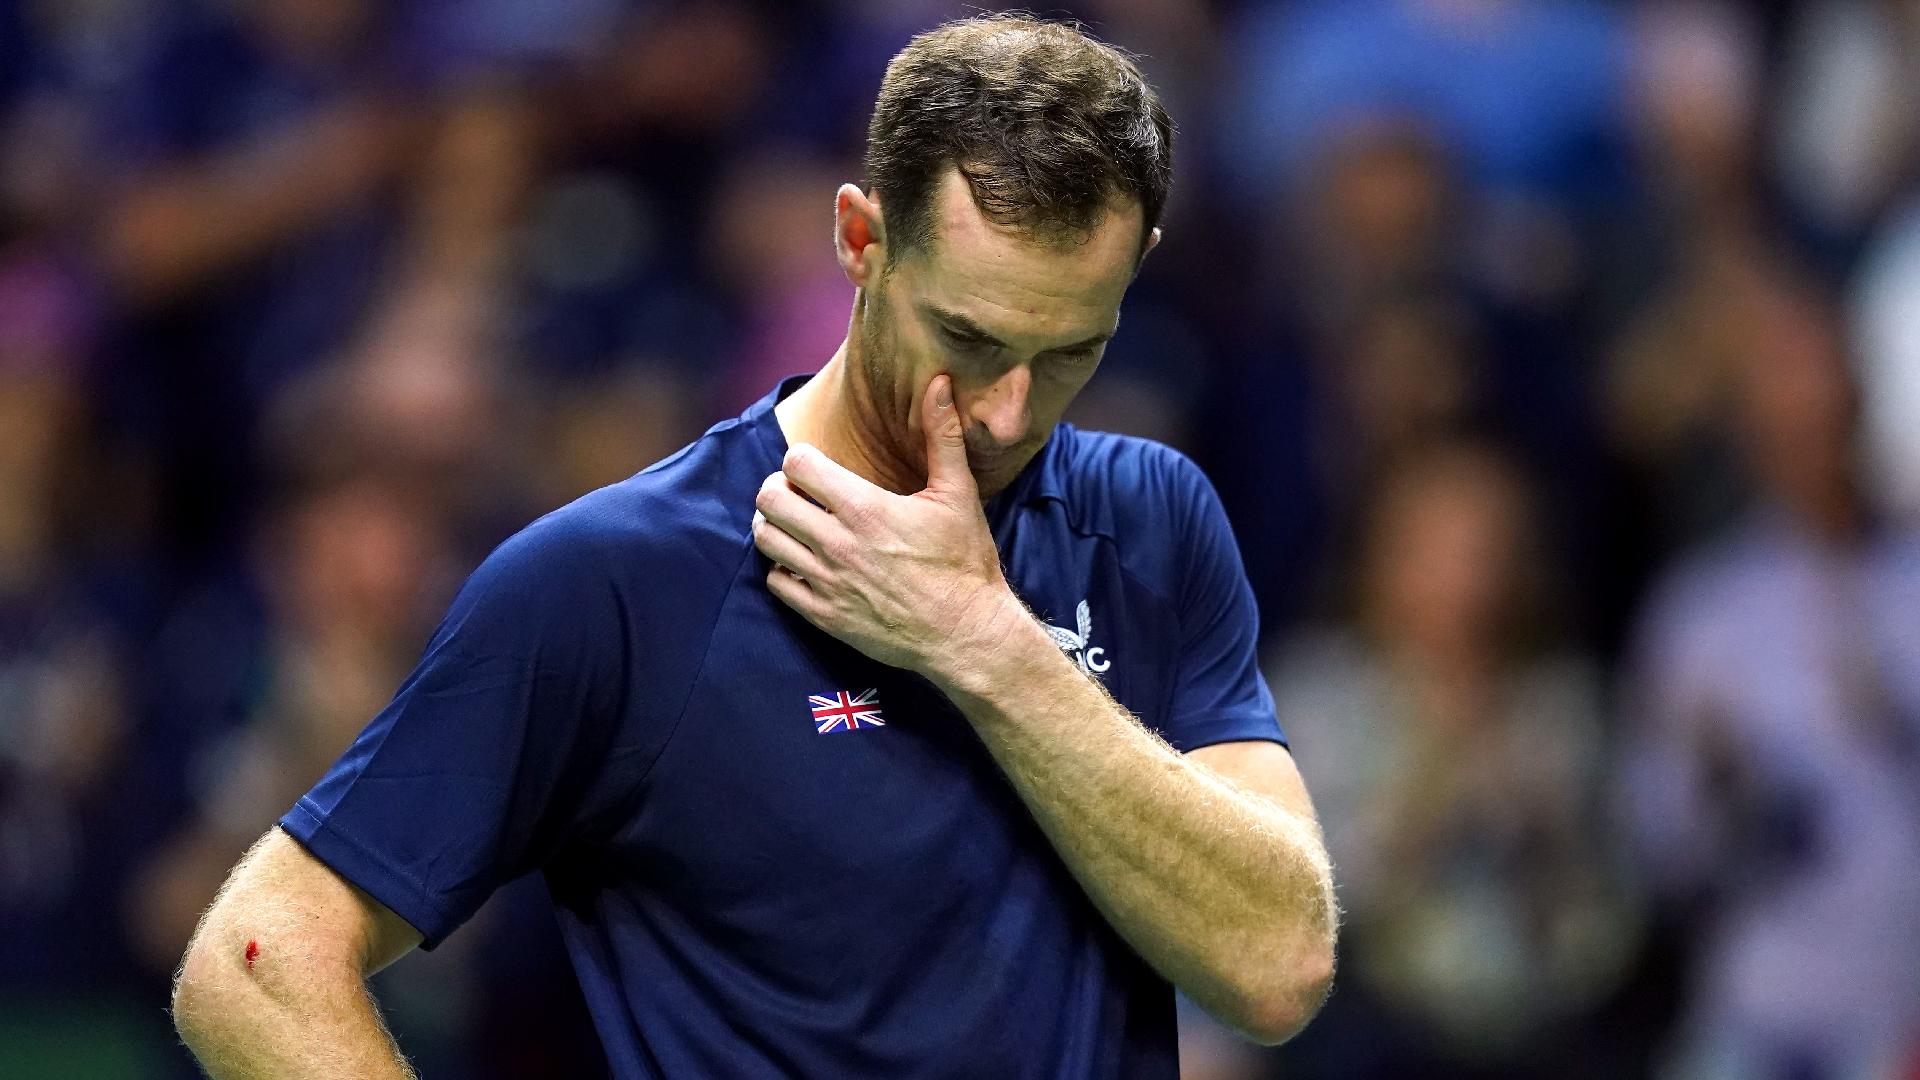 Tearful Andy Murray reveals added significance of come-from-behind Davis Cup win